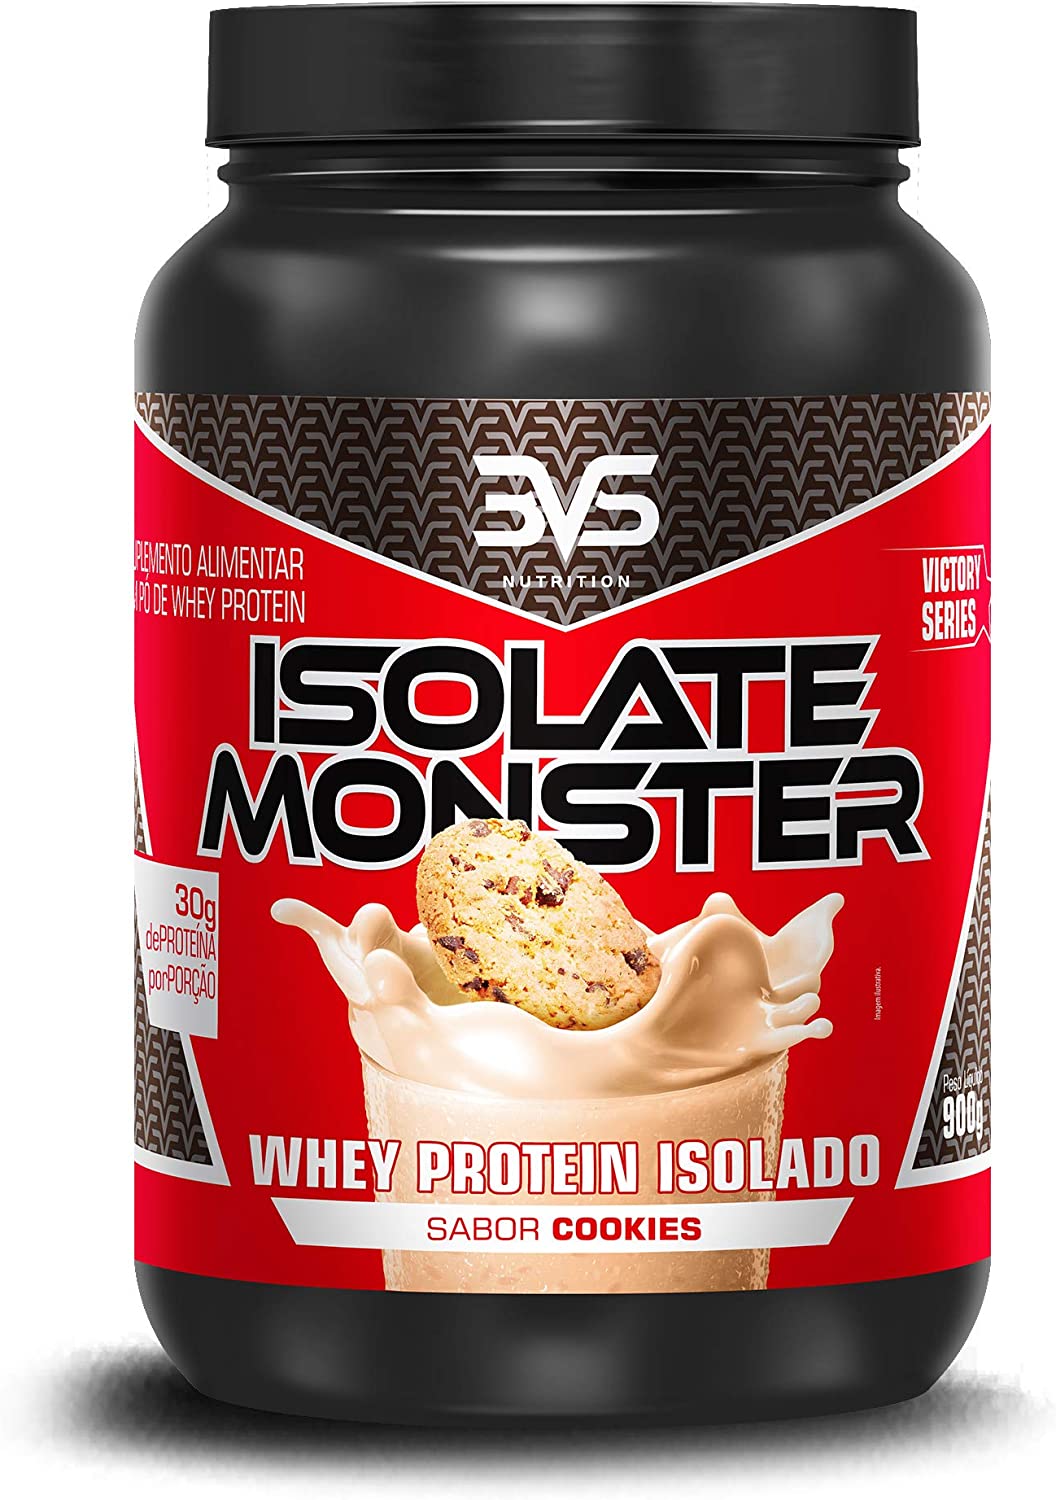 Whey protein Isolate Monster 900g – 3VS Nutrition – Cookies